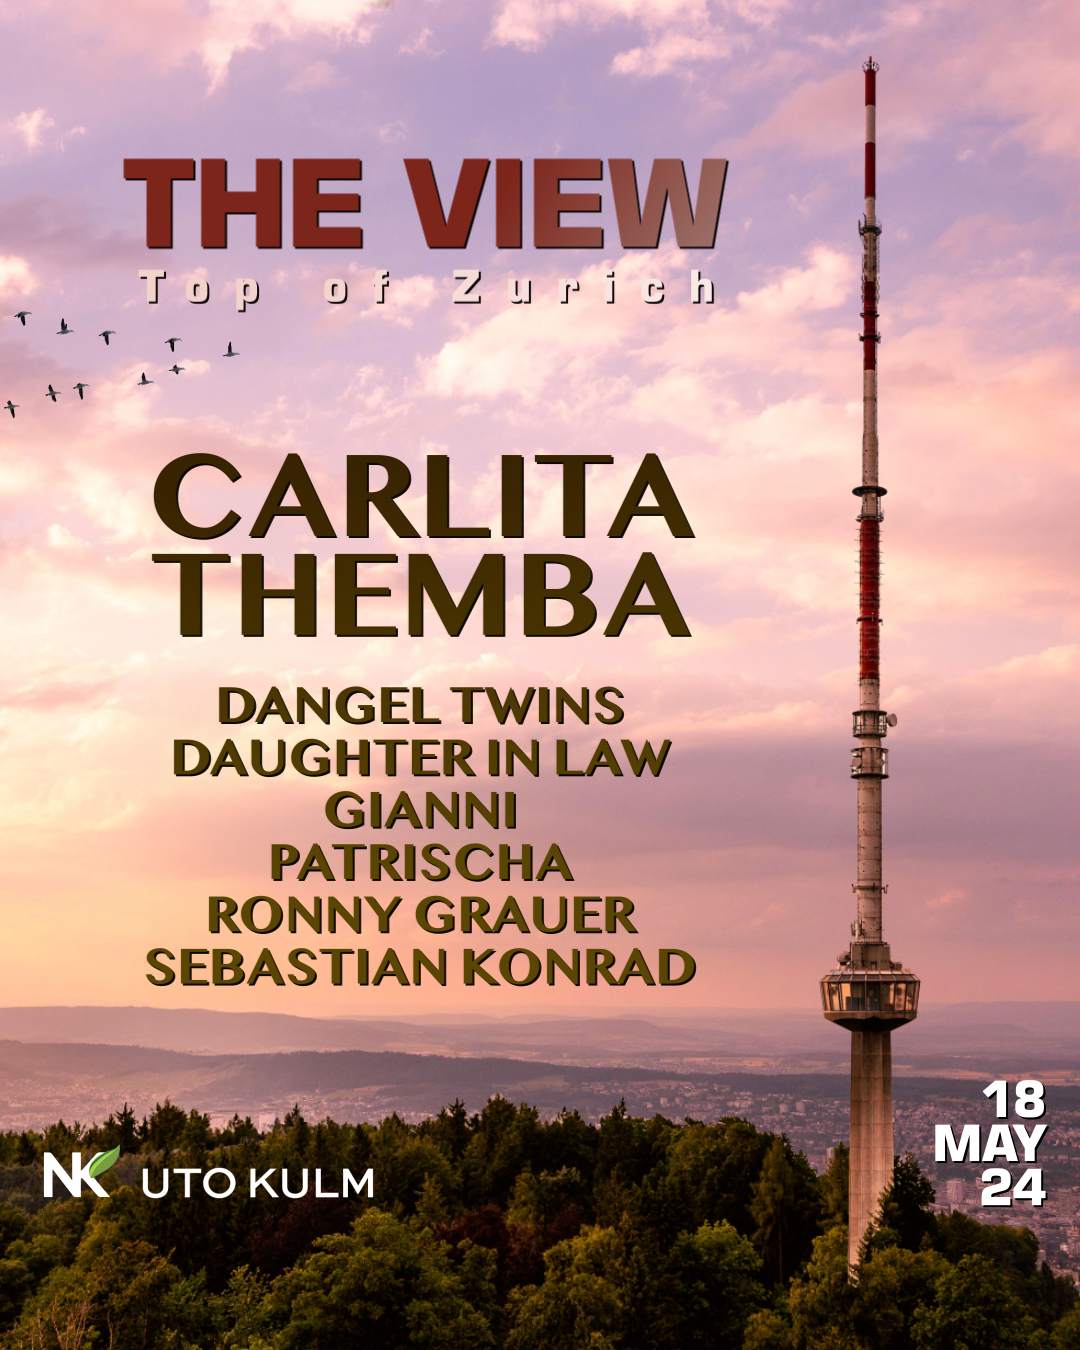 THE VIEW - フライヤー表